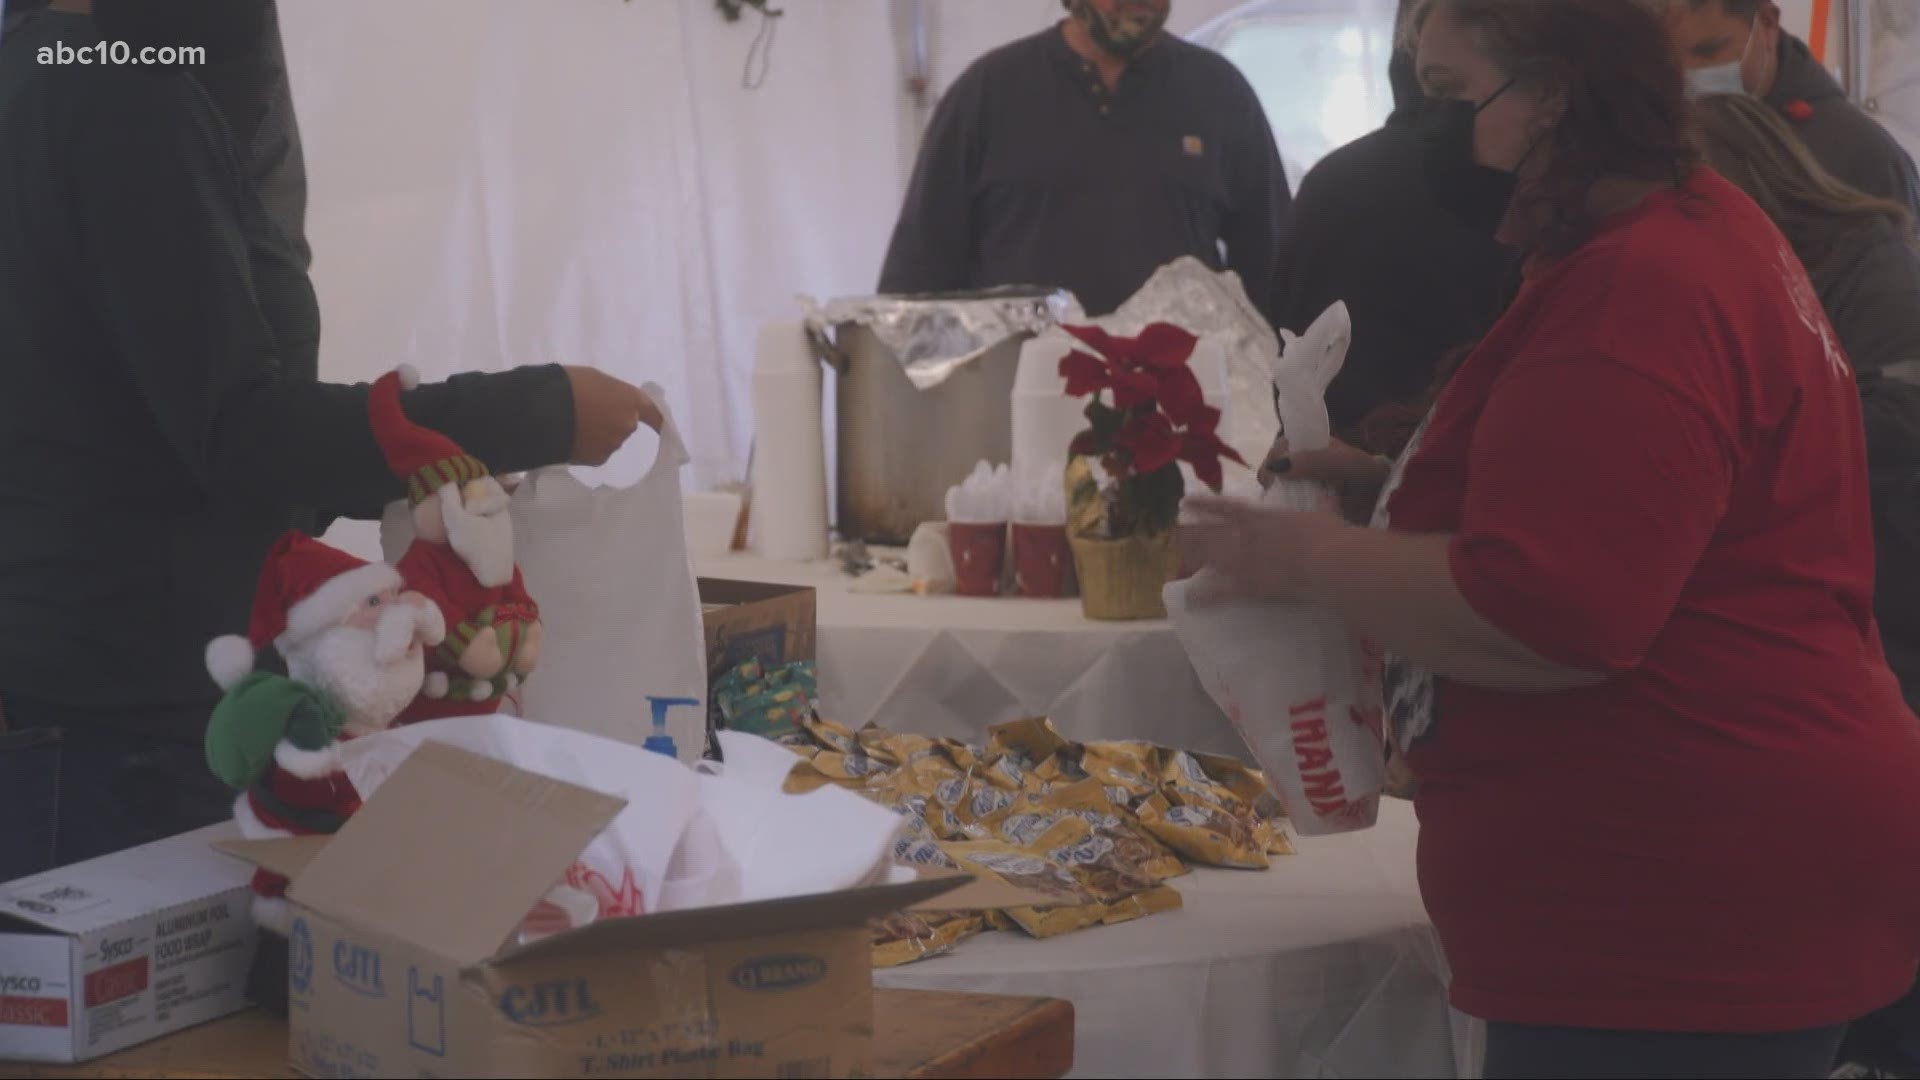 Jamies Bar and Grill gave away 200-holiday meals to families in need for the holiday season thanks to a donation from a Sacramento man.